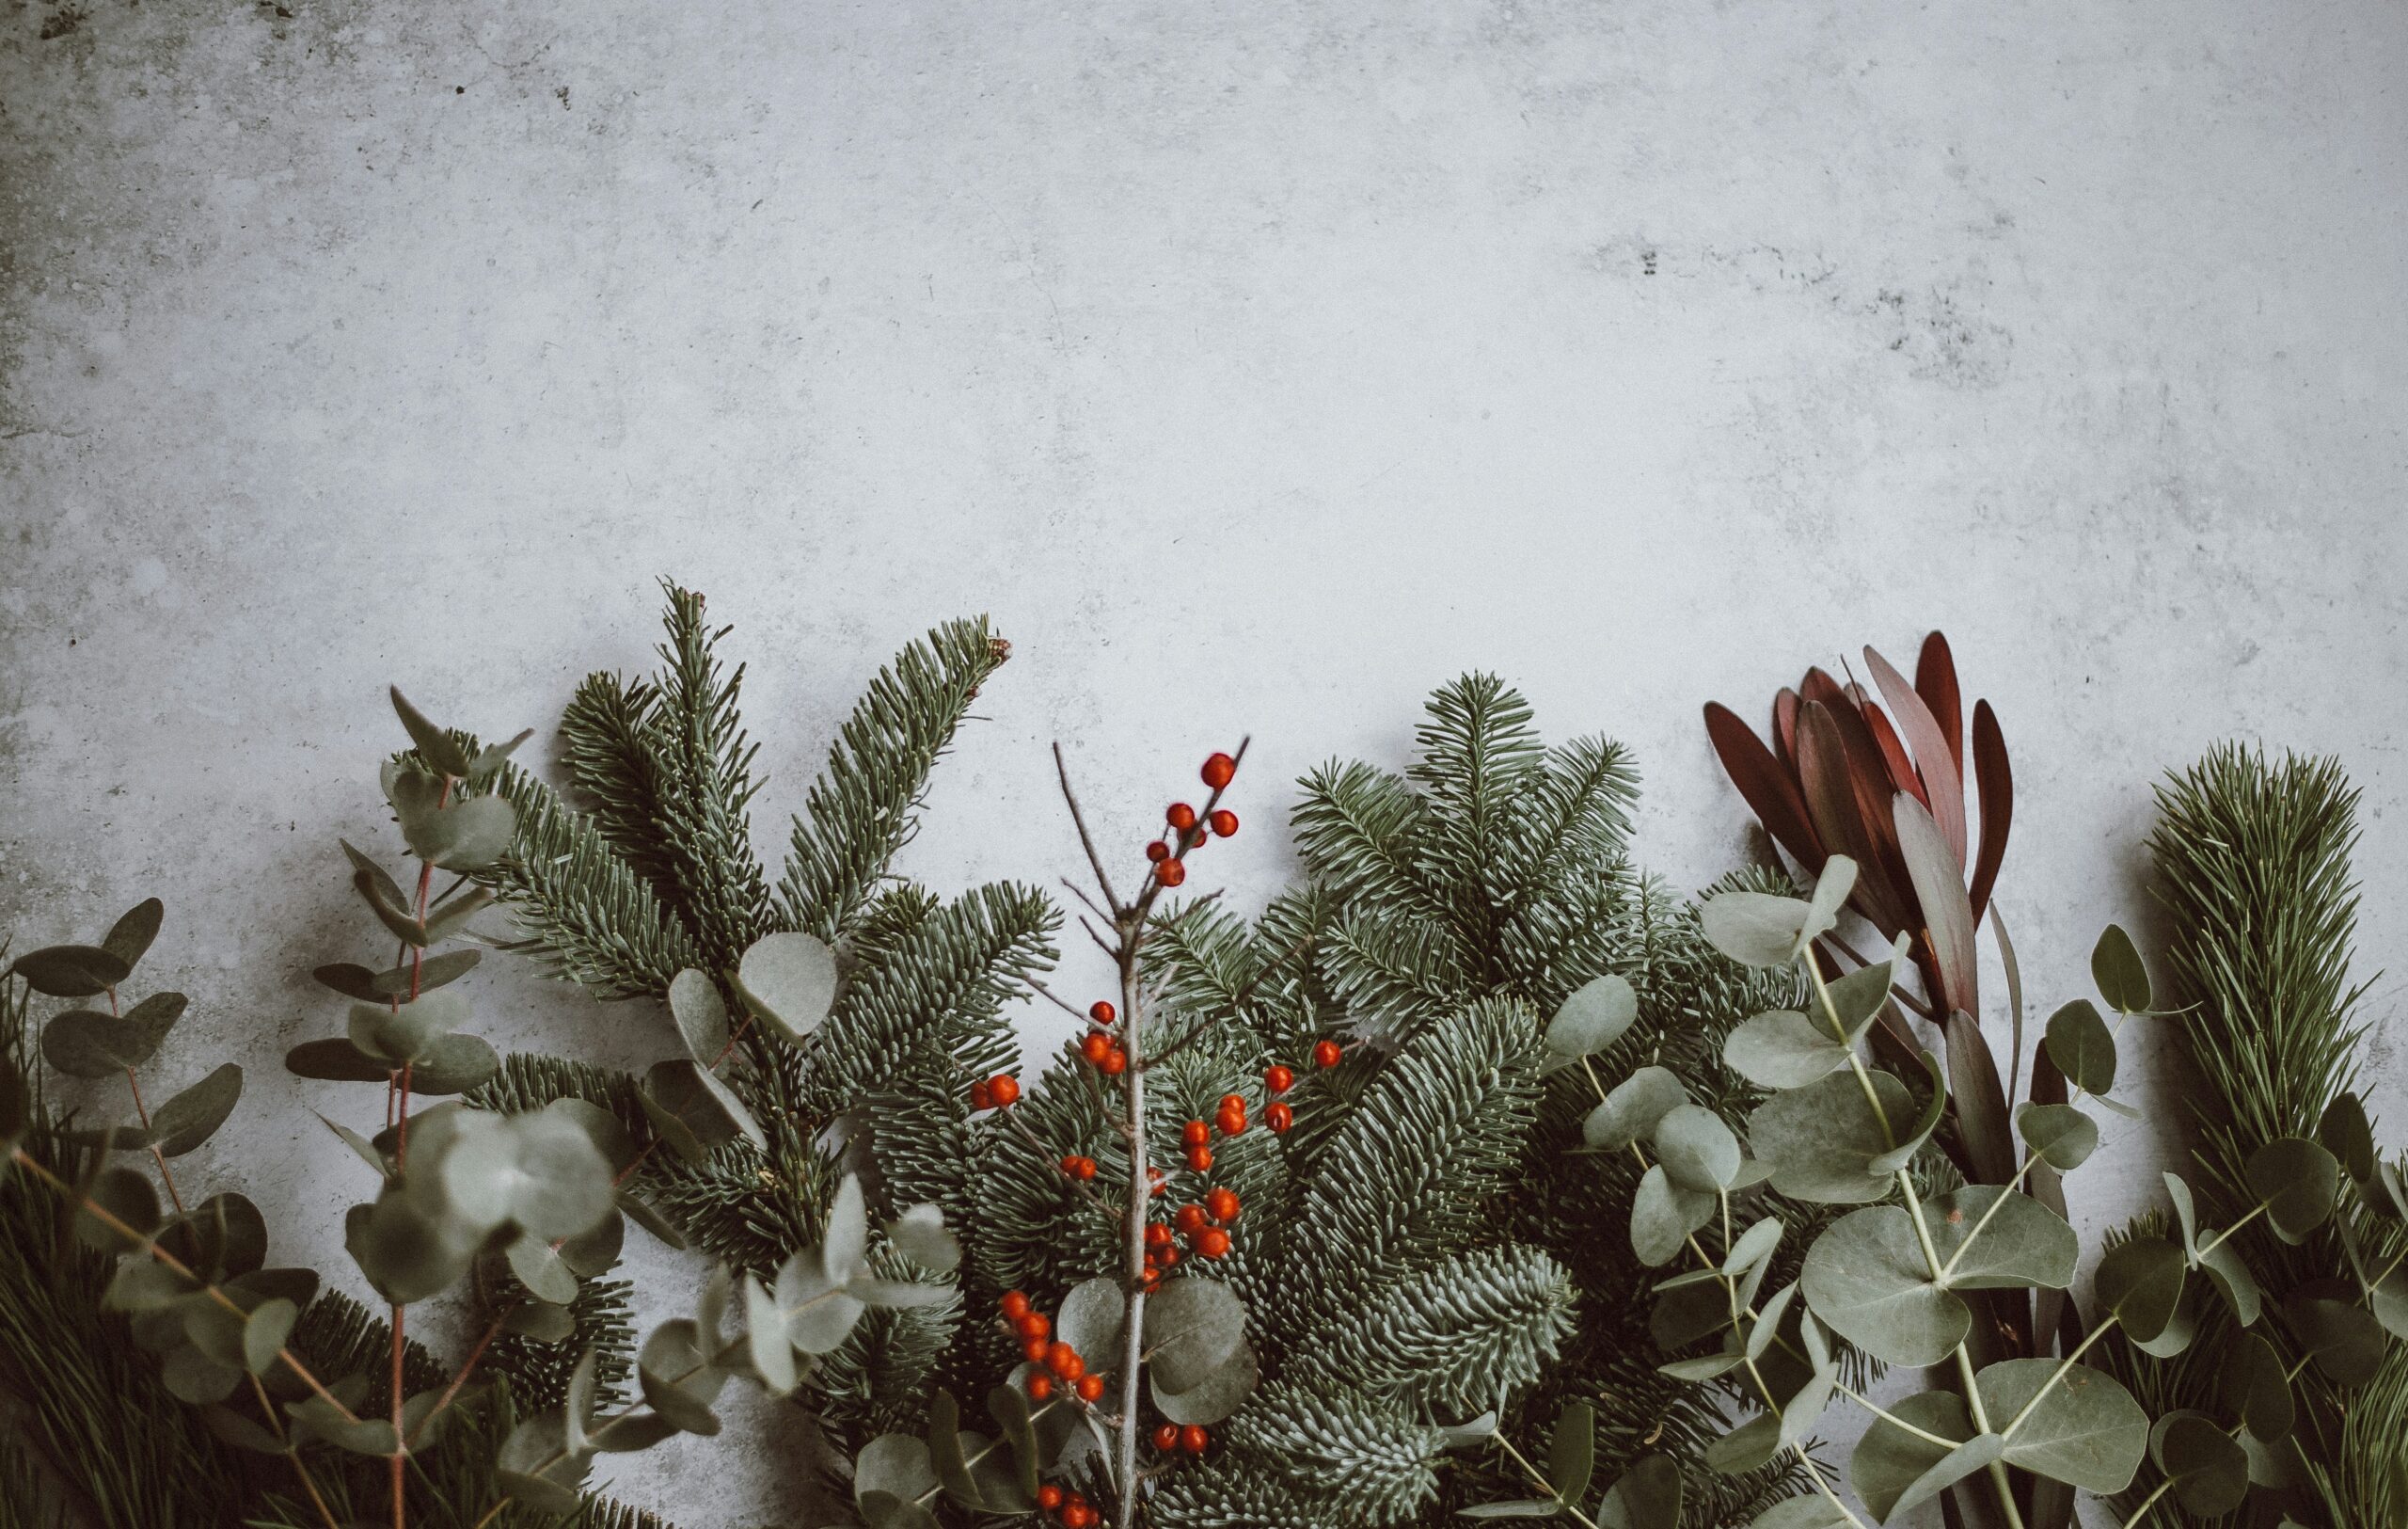 A group of different kinds of greenery for a holiday wreath